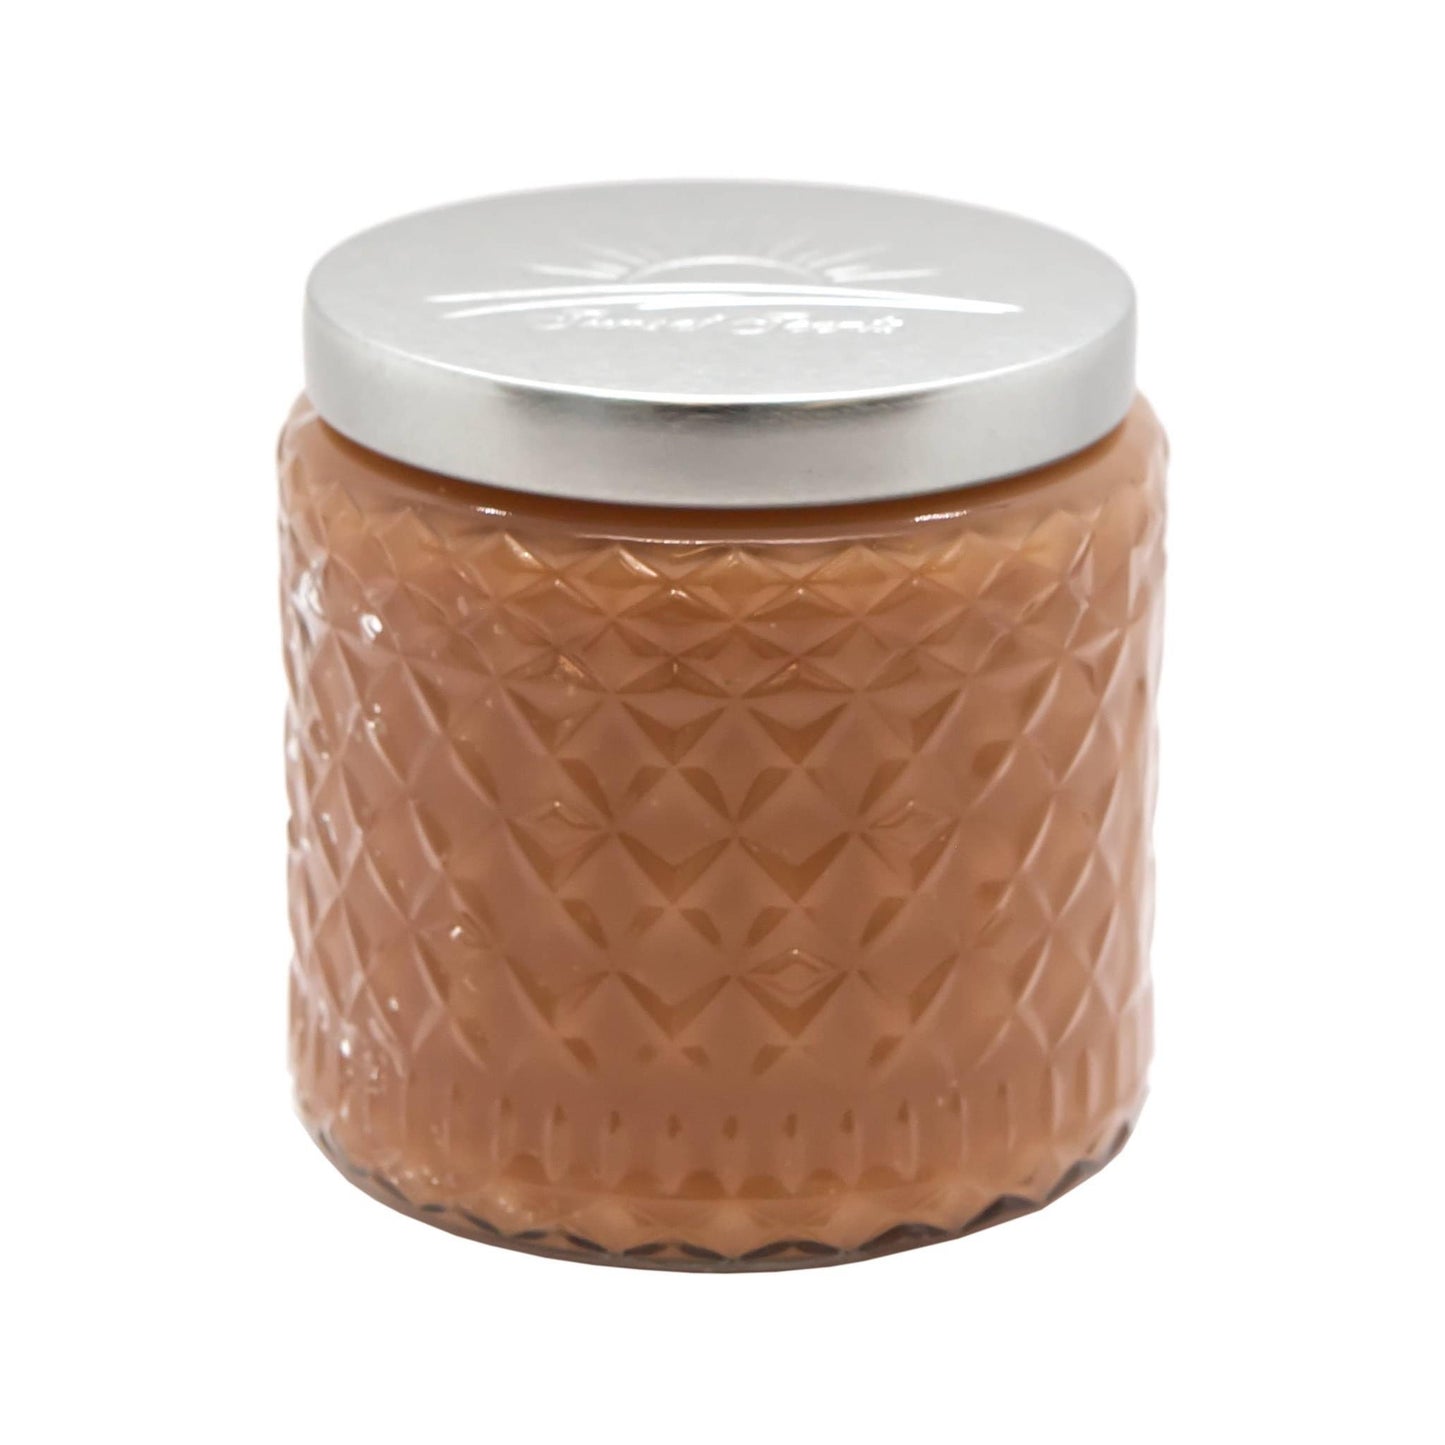 Cinna-Swirl Scented Candle